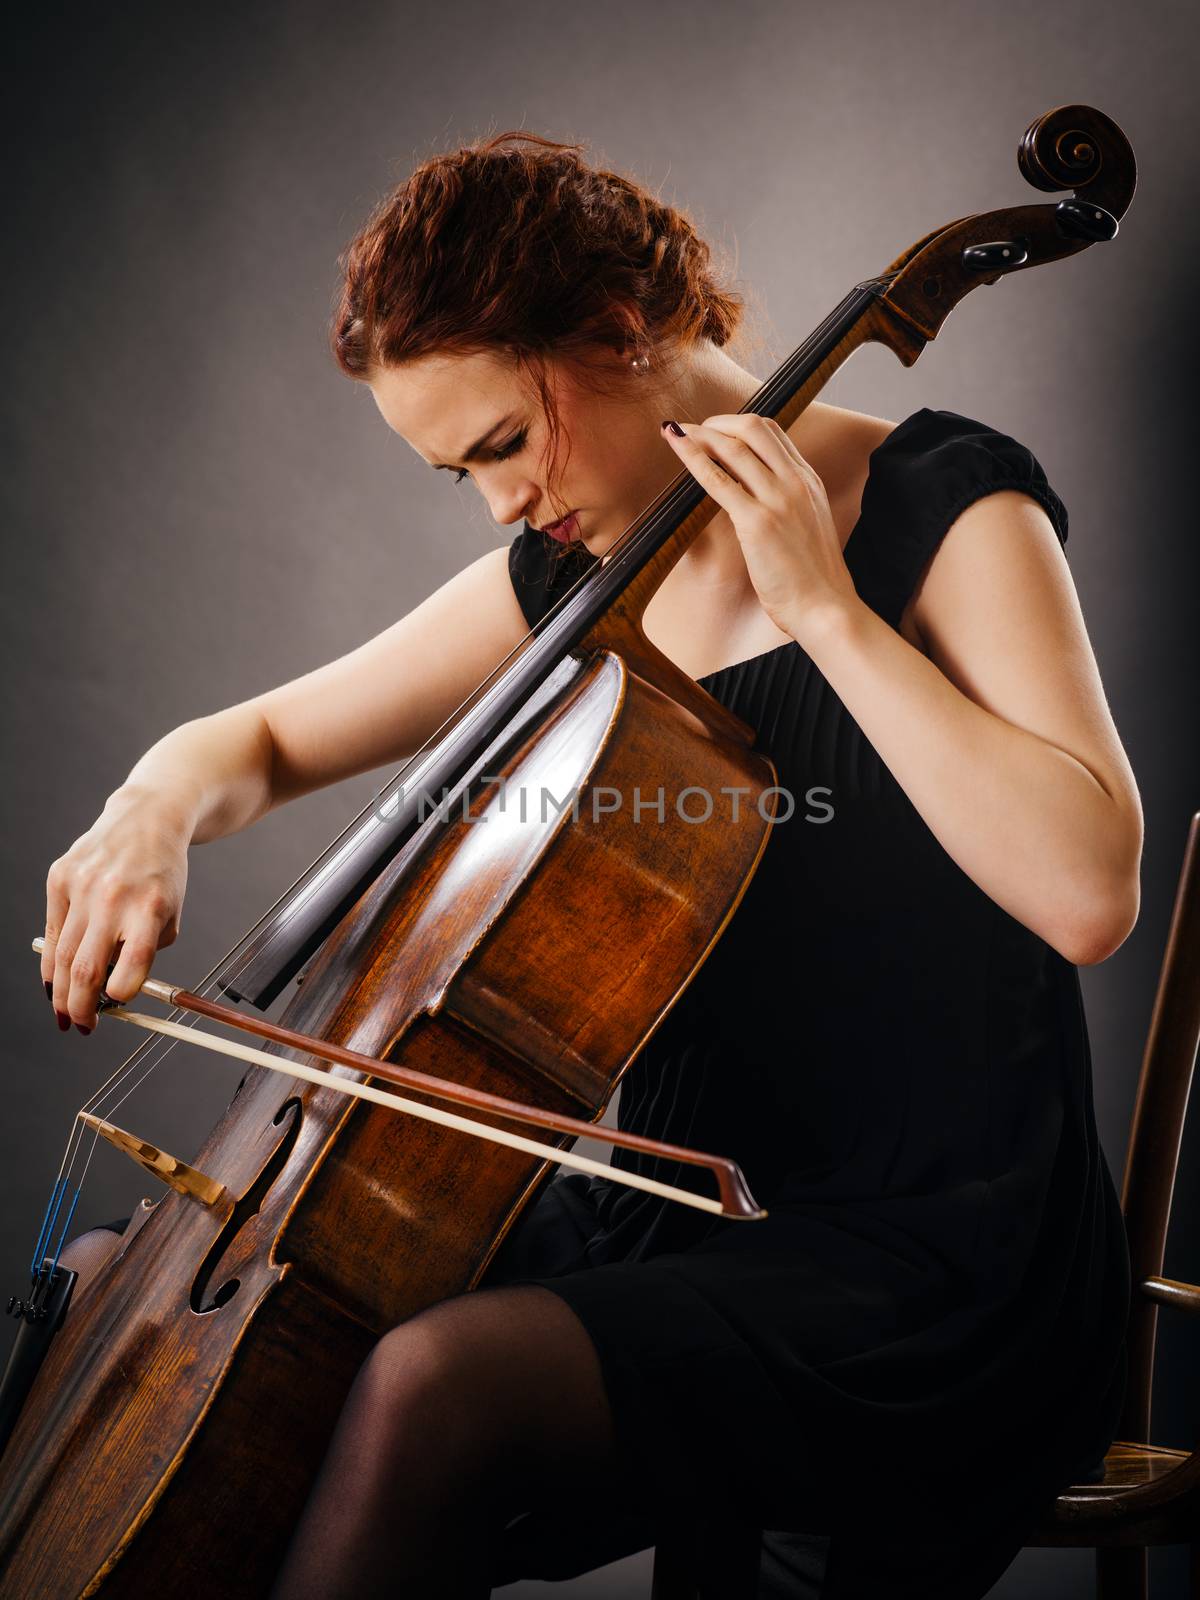 Photo of a beautiful woman concentrating on her cello playing.